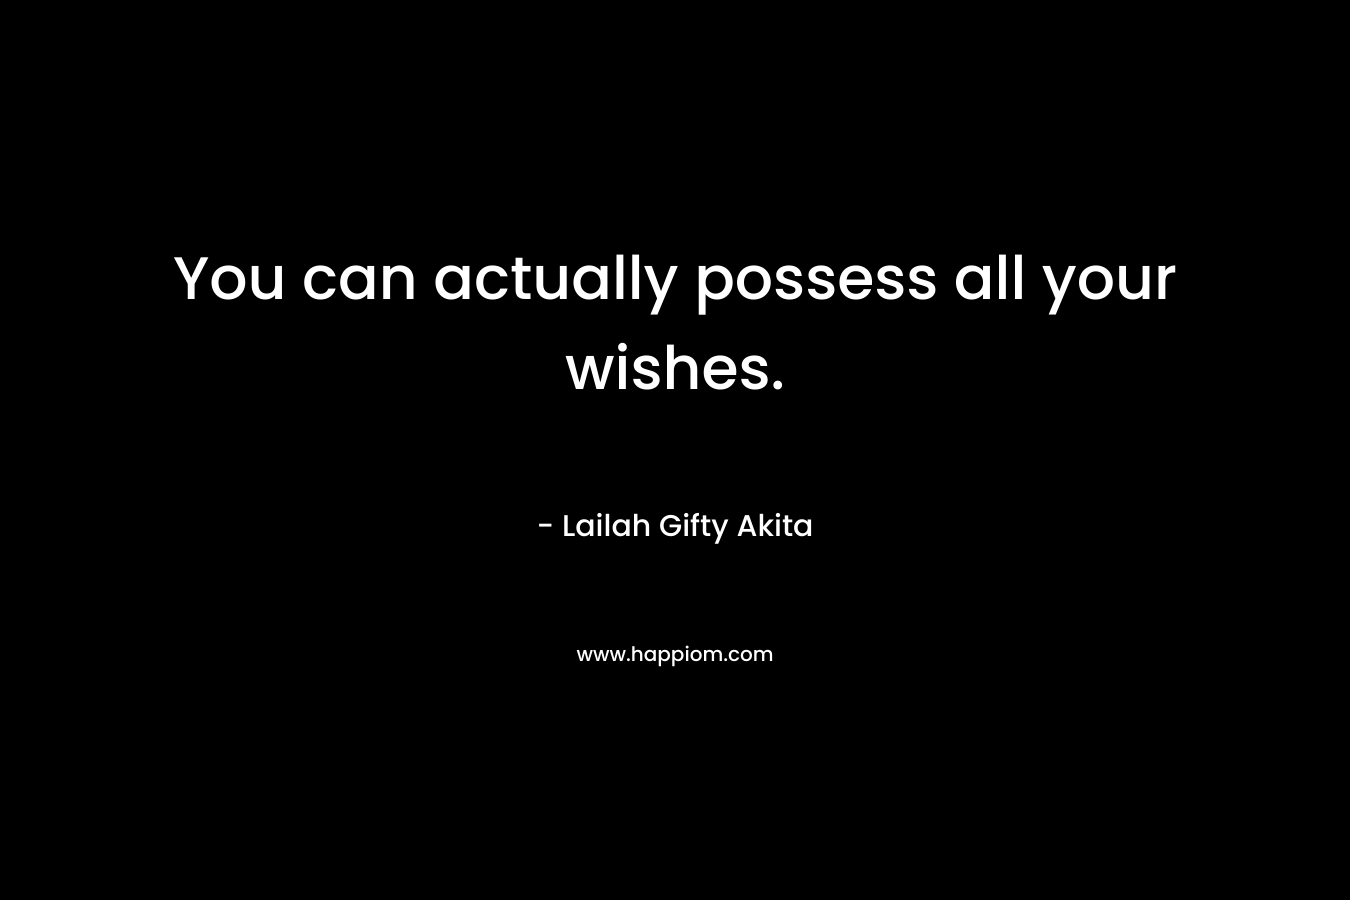 You can actually possess all your wishes.